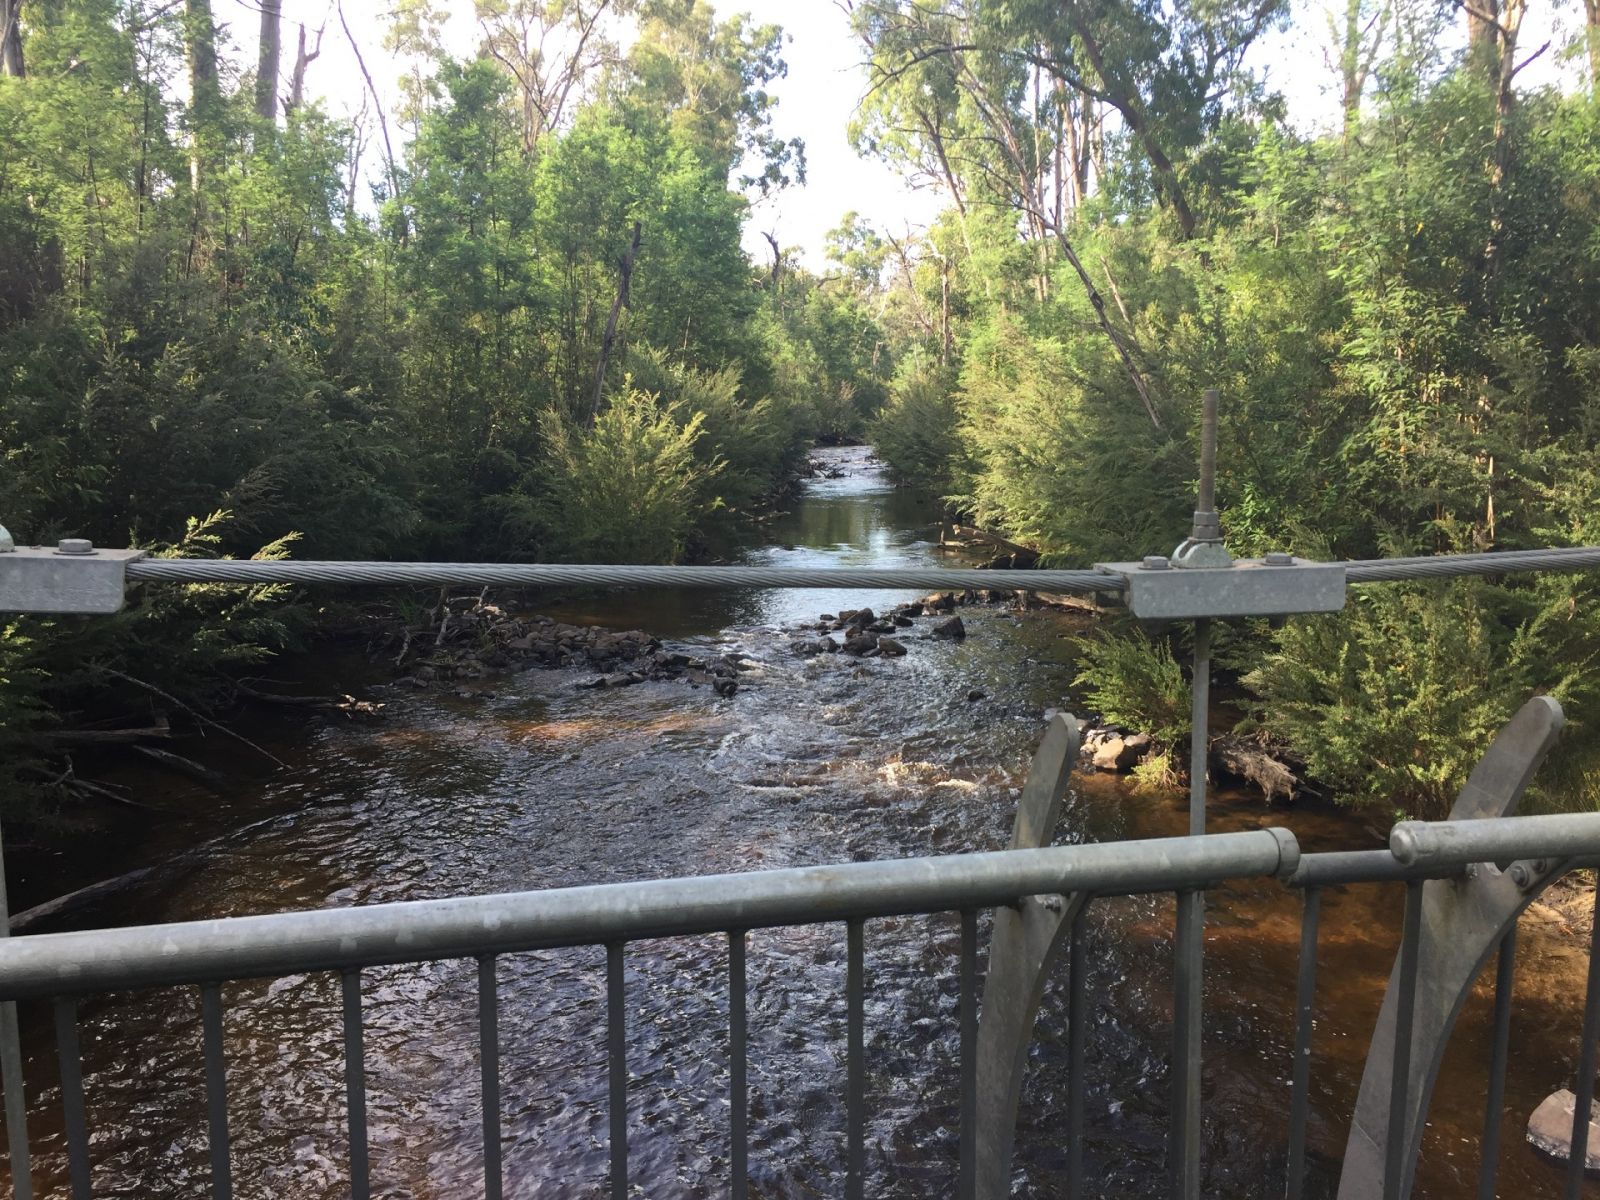 View of the Murrindindi River looking down from a footbridge